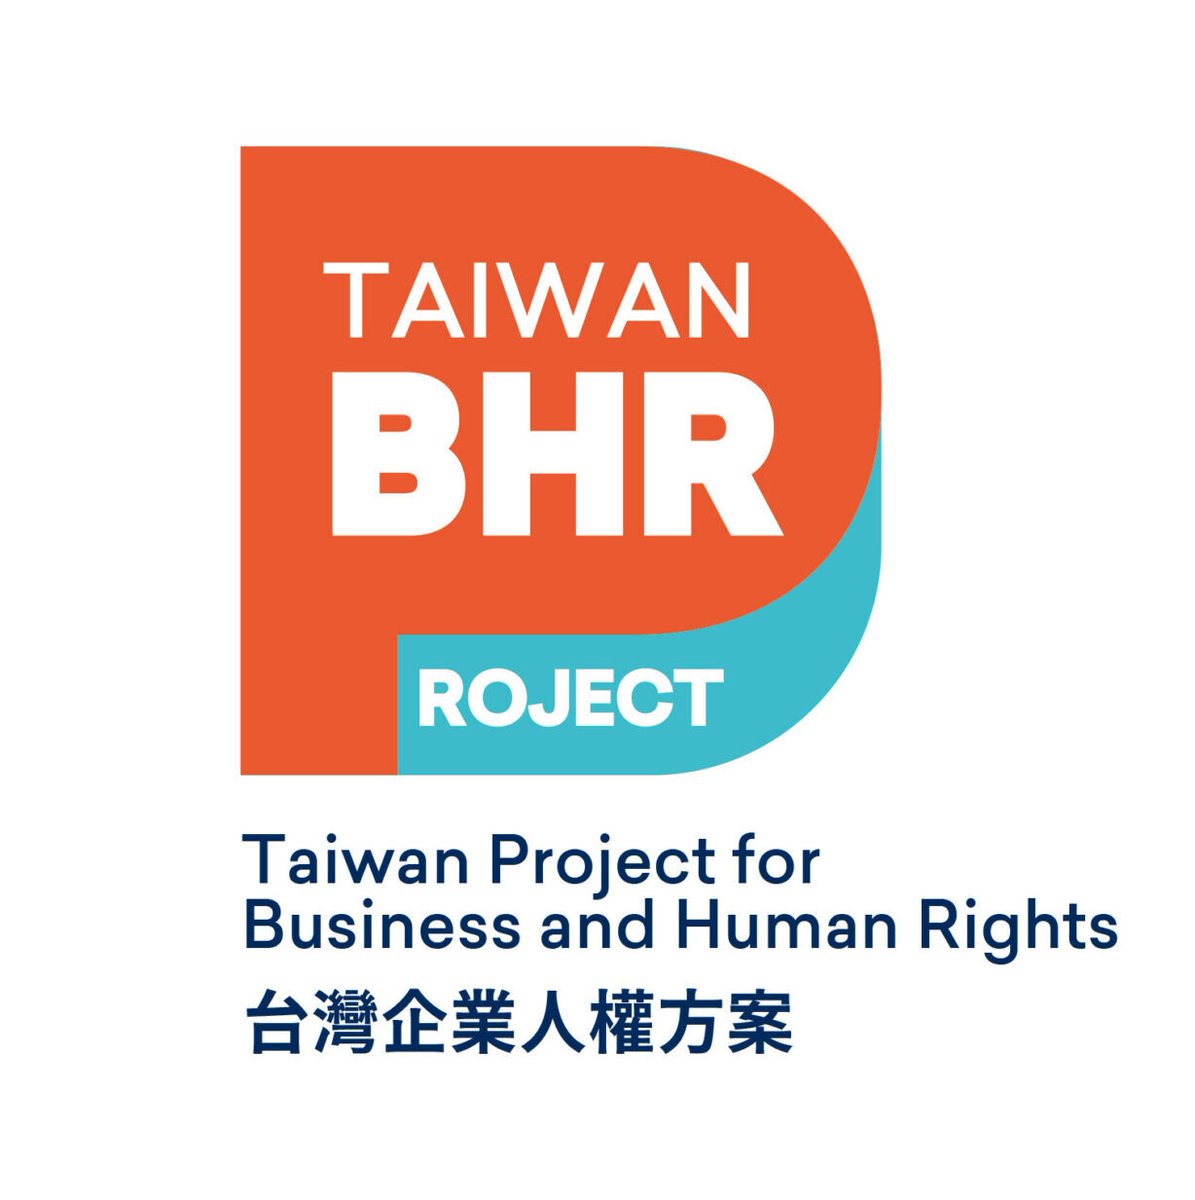 🔔Launching the Taiwan Project for Business and Human Rights [台灣企業人權方案] w/ renowned law Prof Yu-Fan Chiu @NYCU_official to: 📌research 📌educate 📌build capacity for #BHR & environmental due diligence Get in touch via our website! wbi.org.uk/taiwan-project/